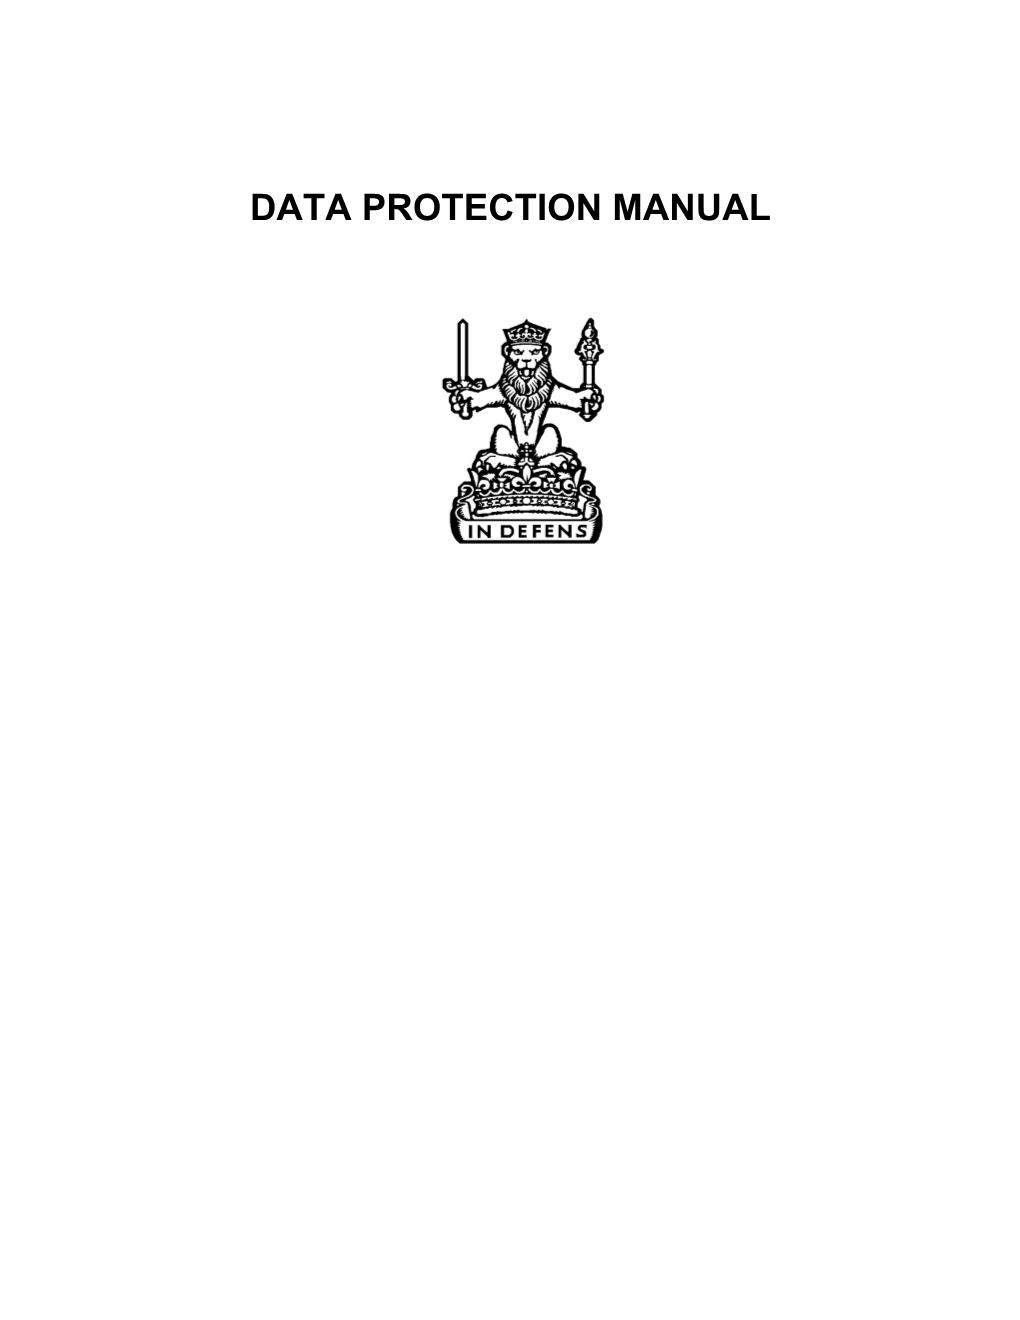 Data Protection Act Guidance Manual